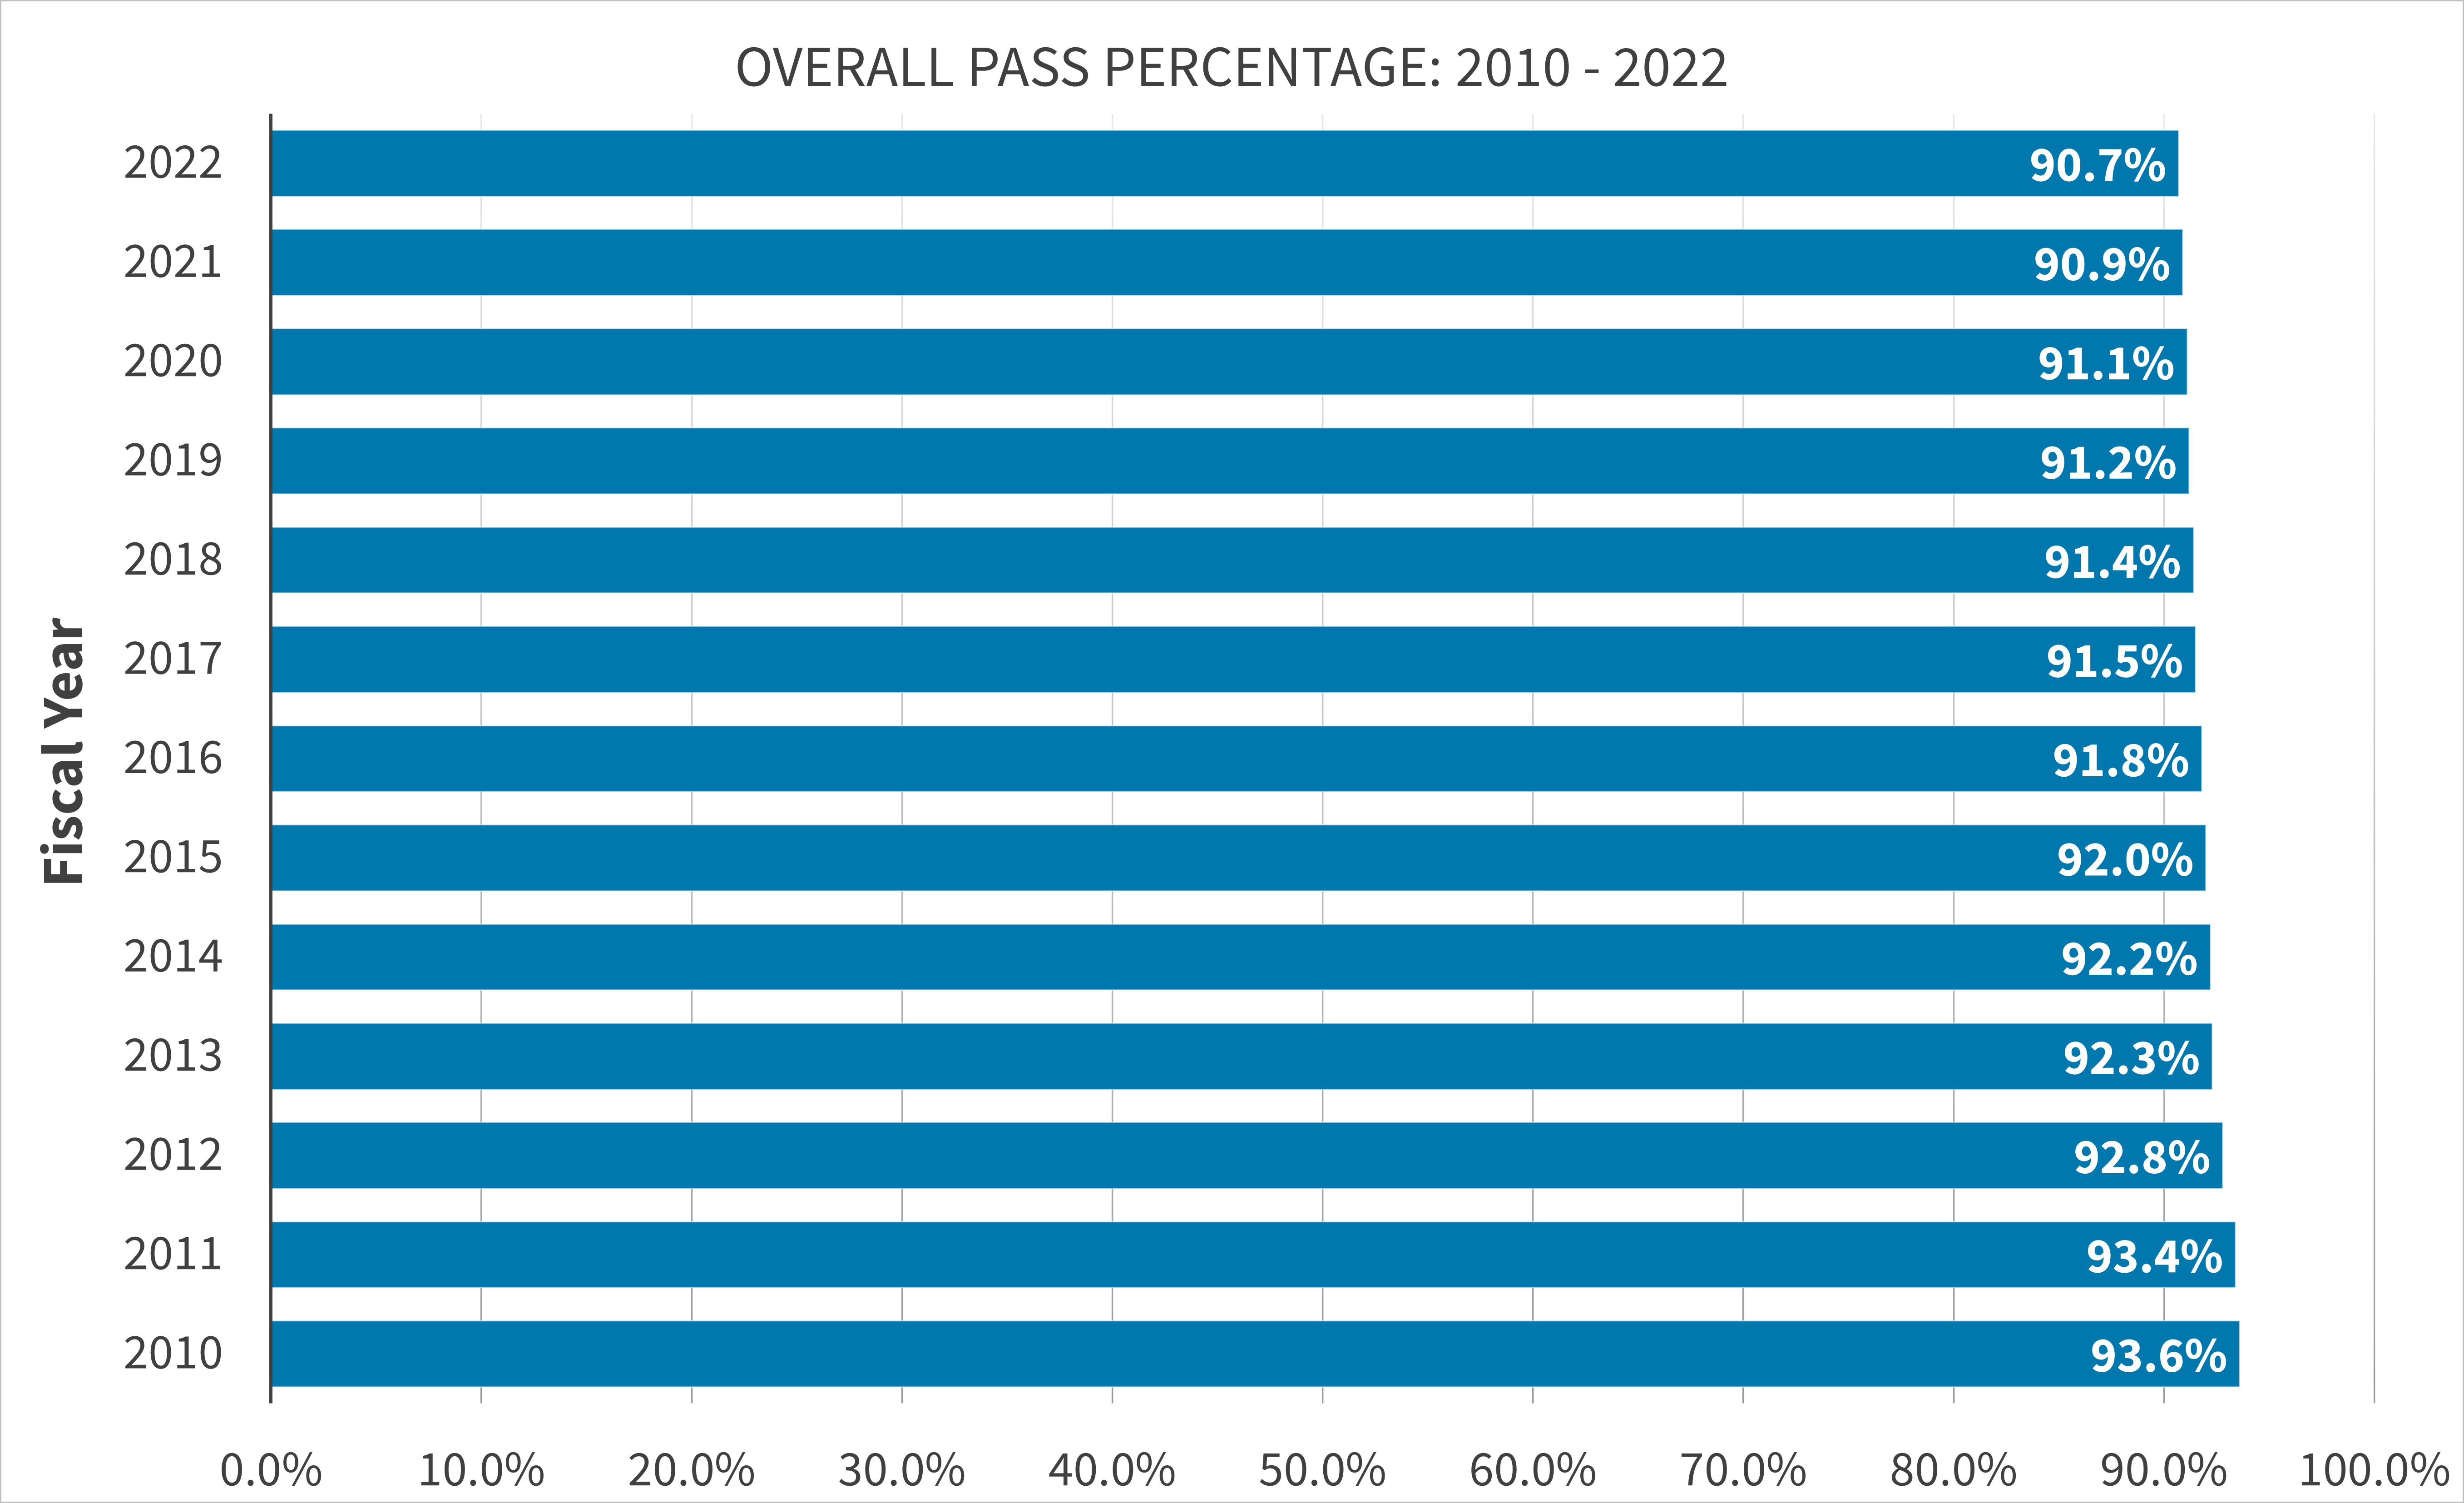 Overall Pass Percentage 2010 to 2022